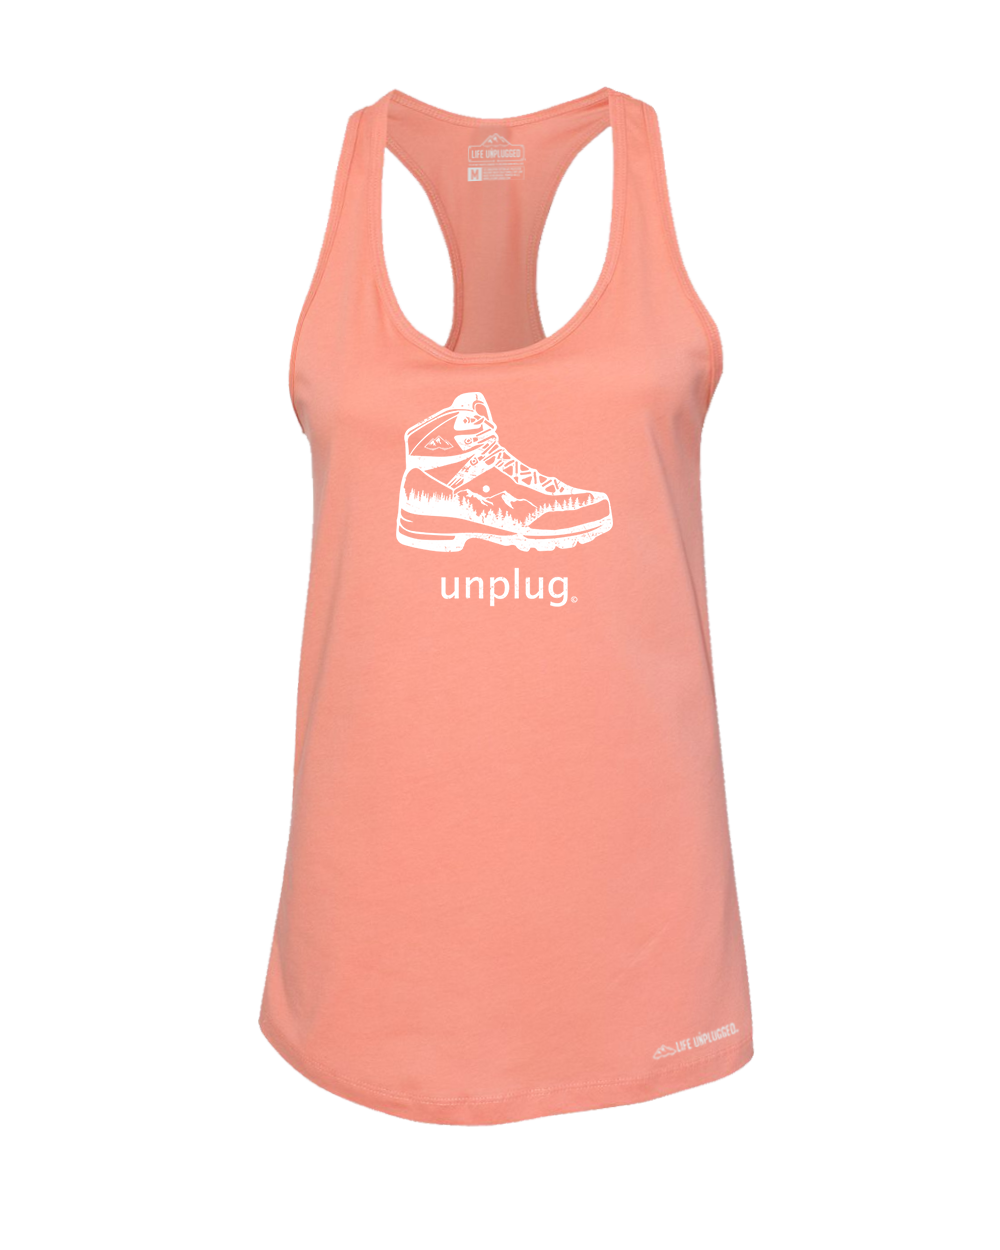 Hiking Boot Mountain Scene Premium Women's Relaxed Fit Racerback Tank Top - Life Unplugged